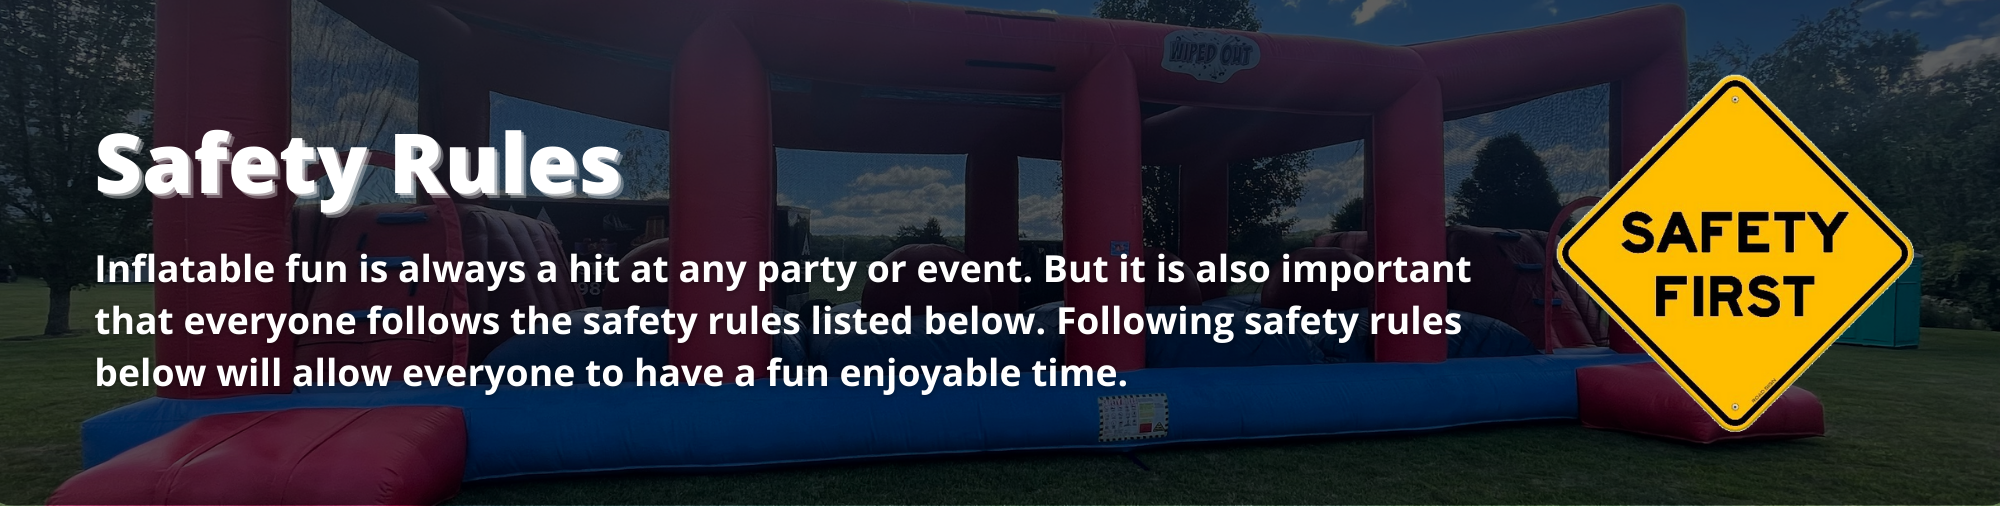 Inflatable fun is always a hit at any party or event. But it is also important that everyone follows the safety rules listed below. Following safety rules below will allow everyone to have a fun enjoyable time. 